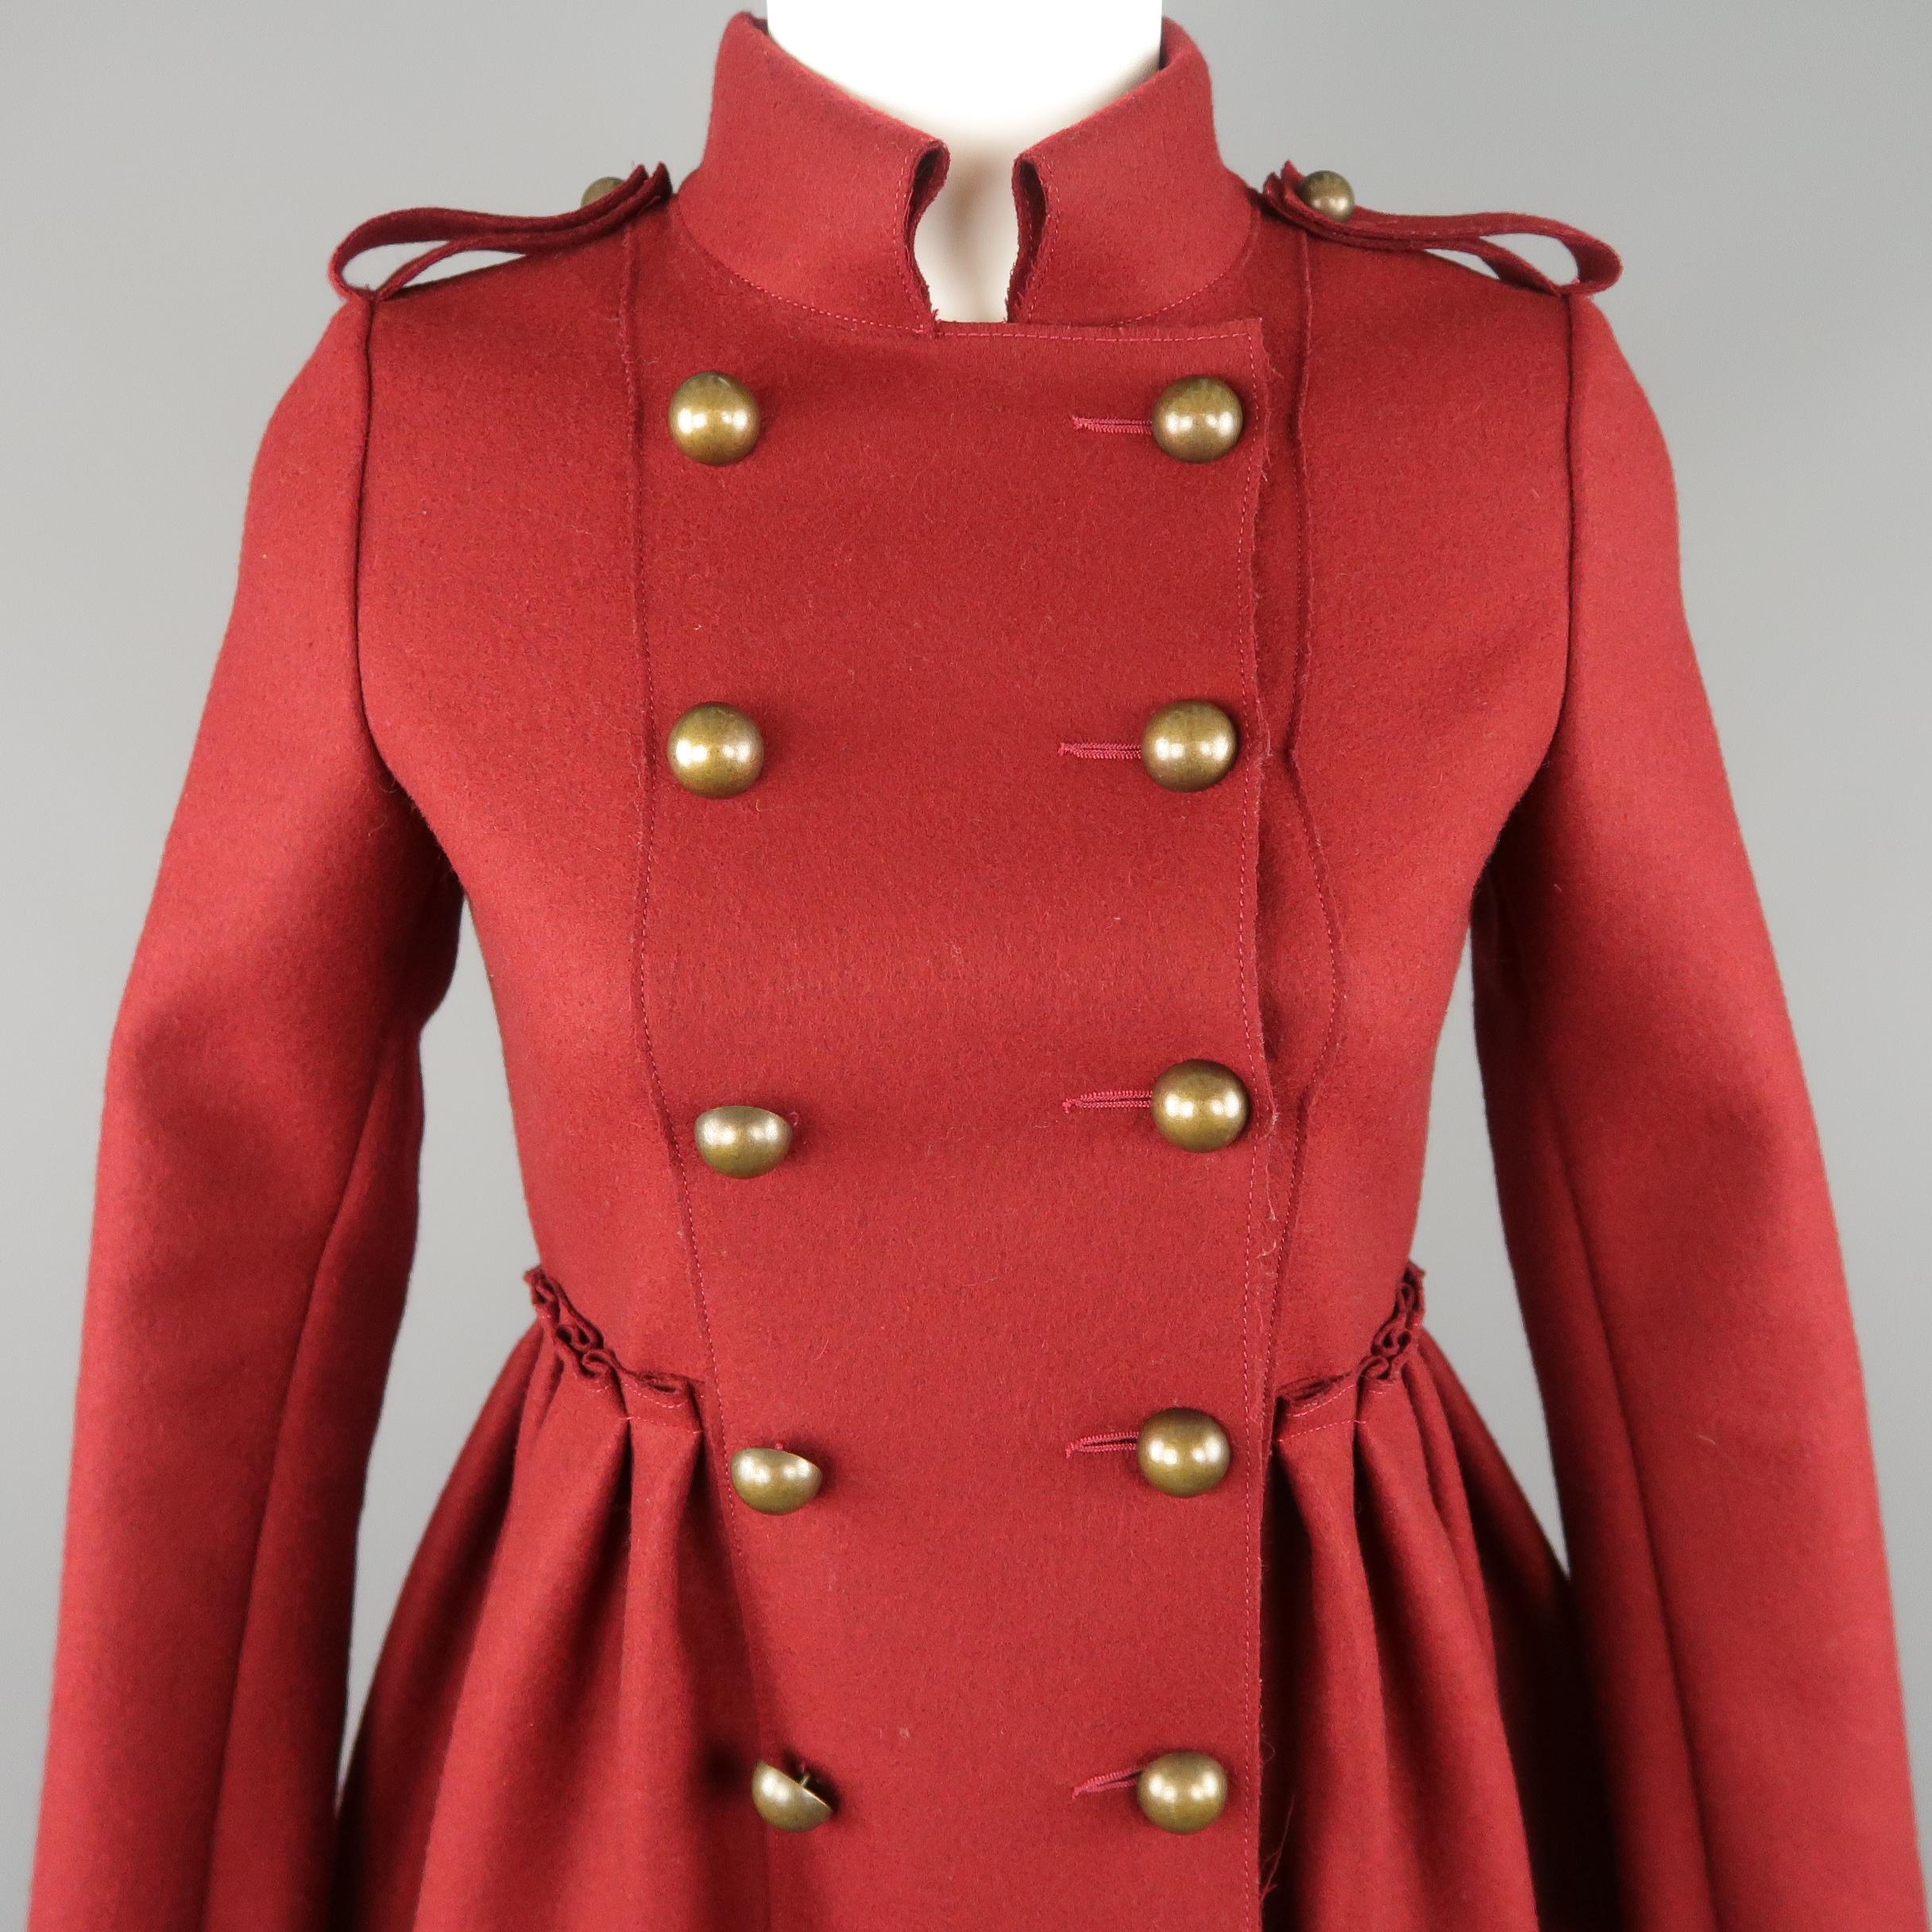 LANVIN military style coat comes in burgundy wool blend felt with a folded stand up collar, double breasted antique gold brass button front, epaulets, and gathered overlay flair skirt. Made in Italy. Retail price $ 3,998.00
 
Excellent Pre-Owned